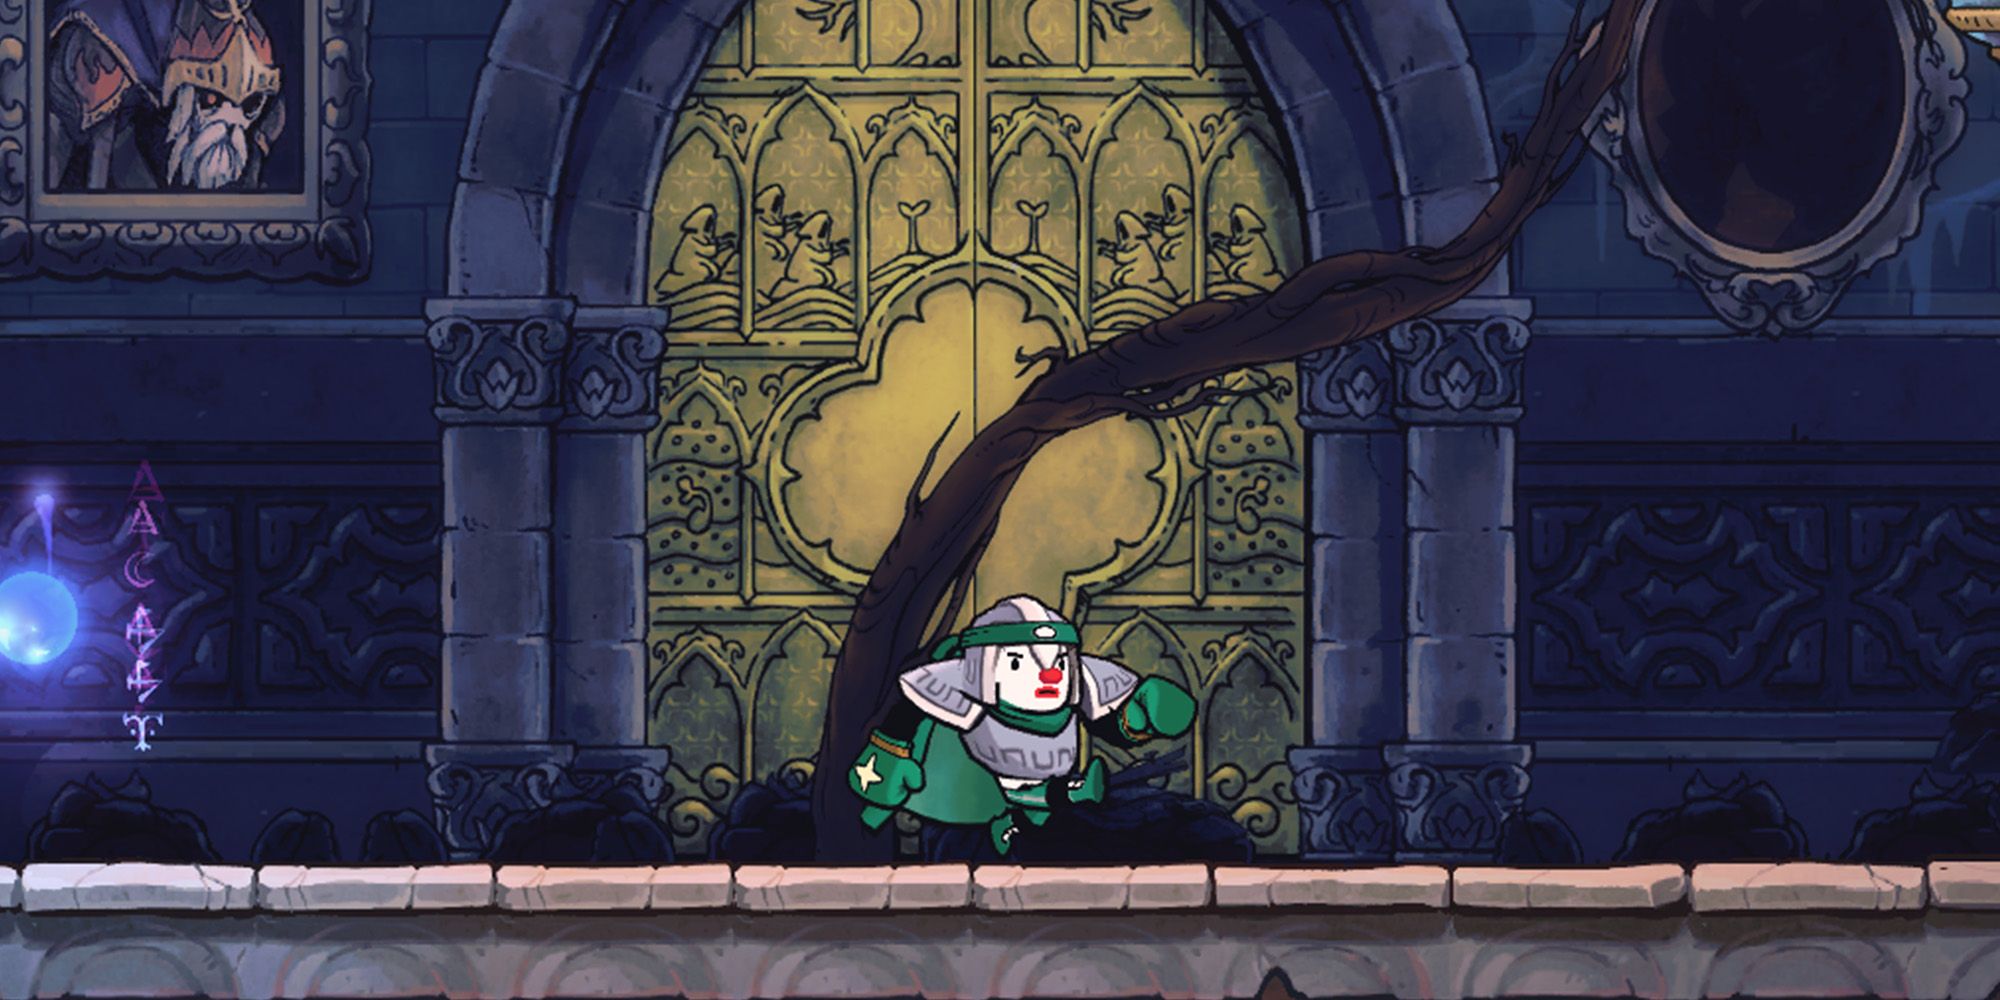 Rogue Legacy 2 screenshot of Boxer with clown makeup running in front of the Golden Gates